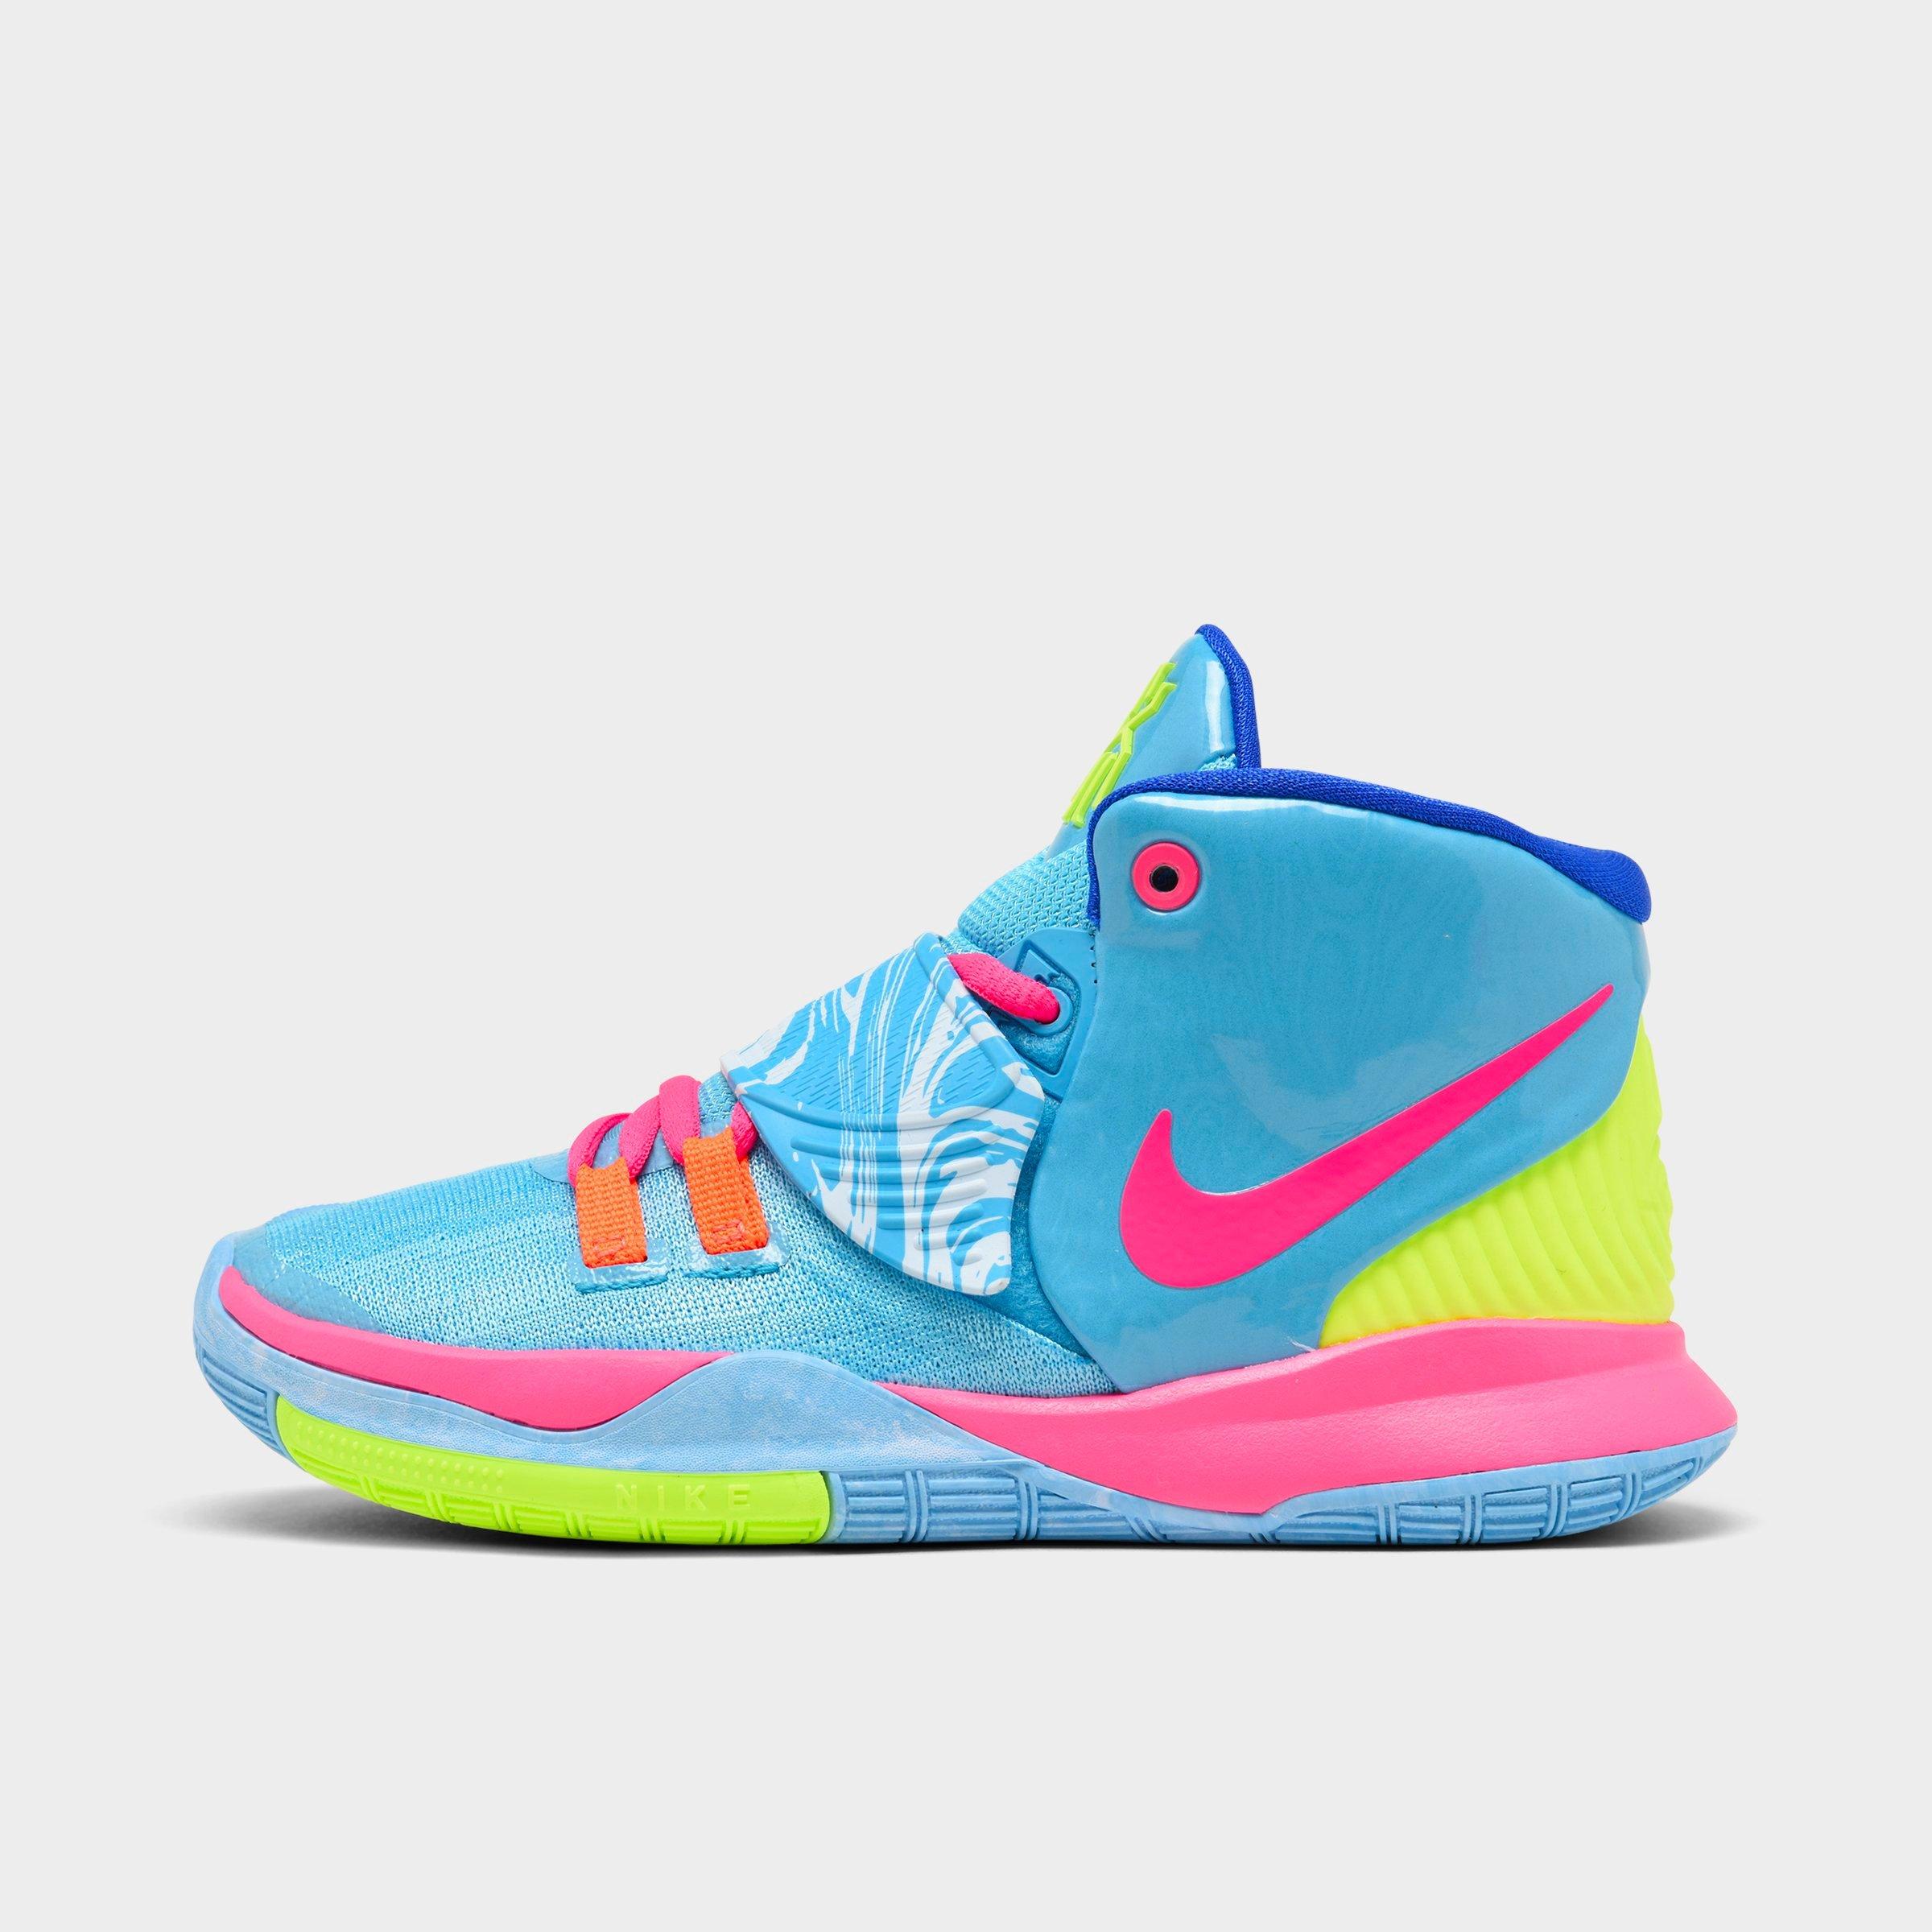 kyrie 6 for kids